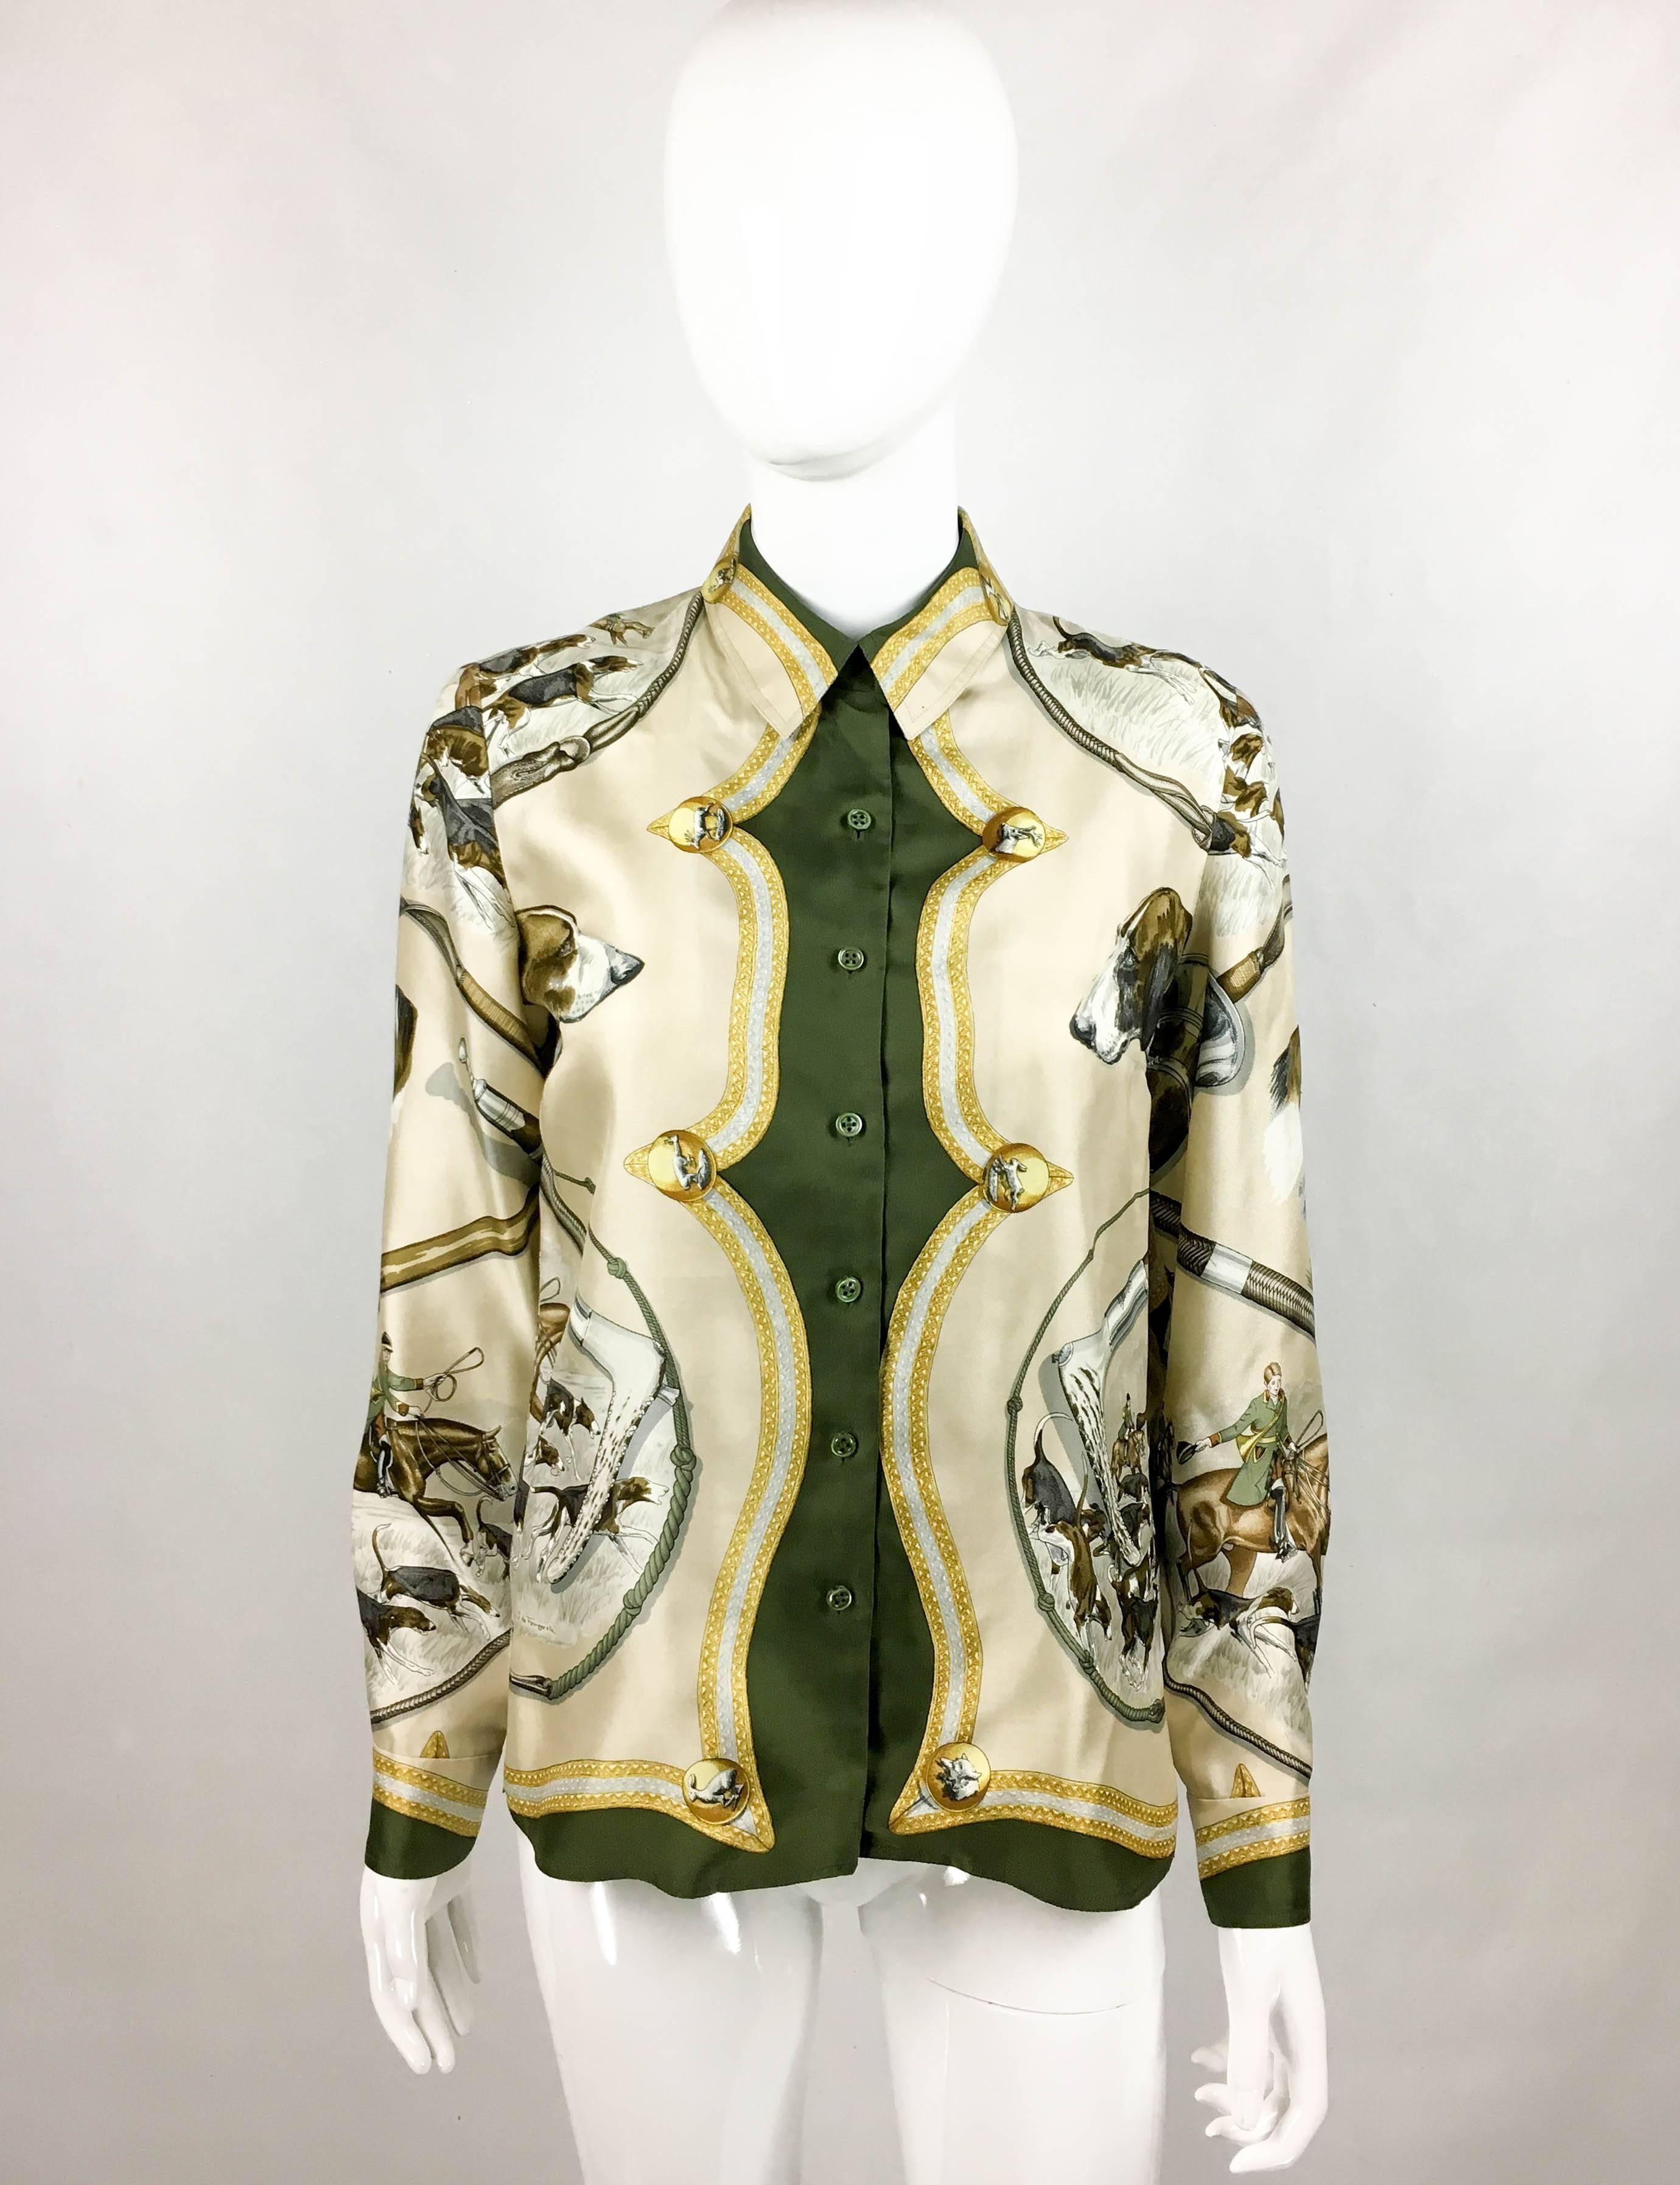 Vintage Hermes Printed Silk Shirt. This beautiful silk shirt by Hermes dates back from the 1970’s, more precisely from 1979. The hunting-themed print, designed by J. de Fangerolla, features hounds and hunters on horses, as well as medallions with